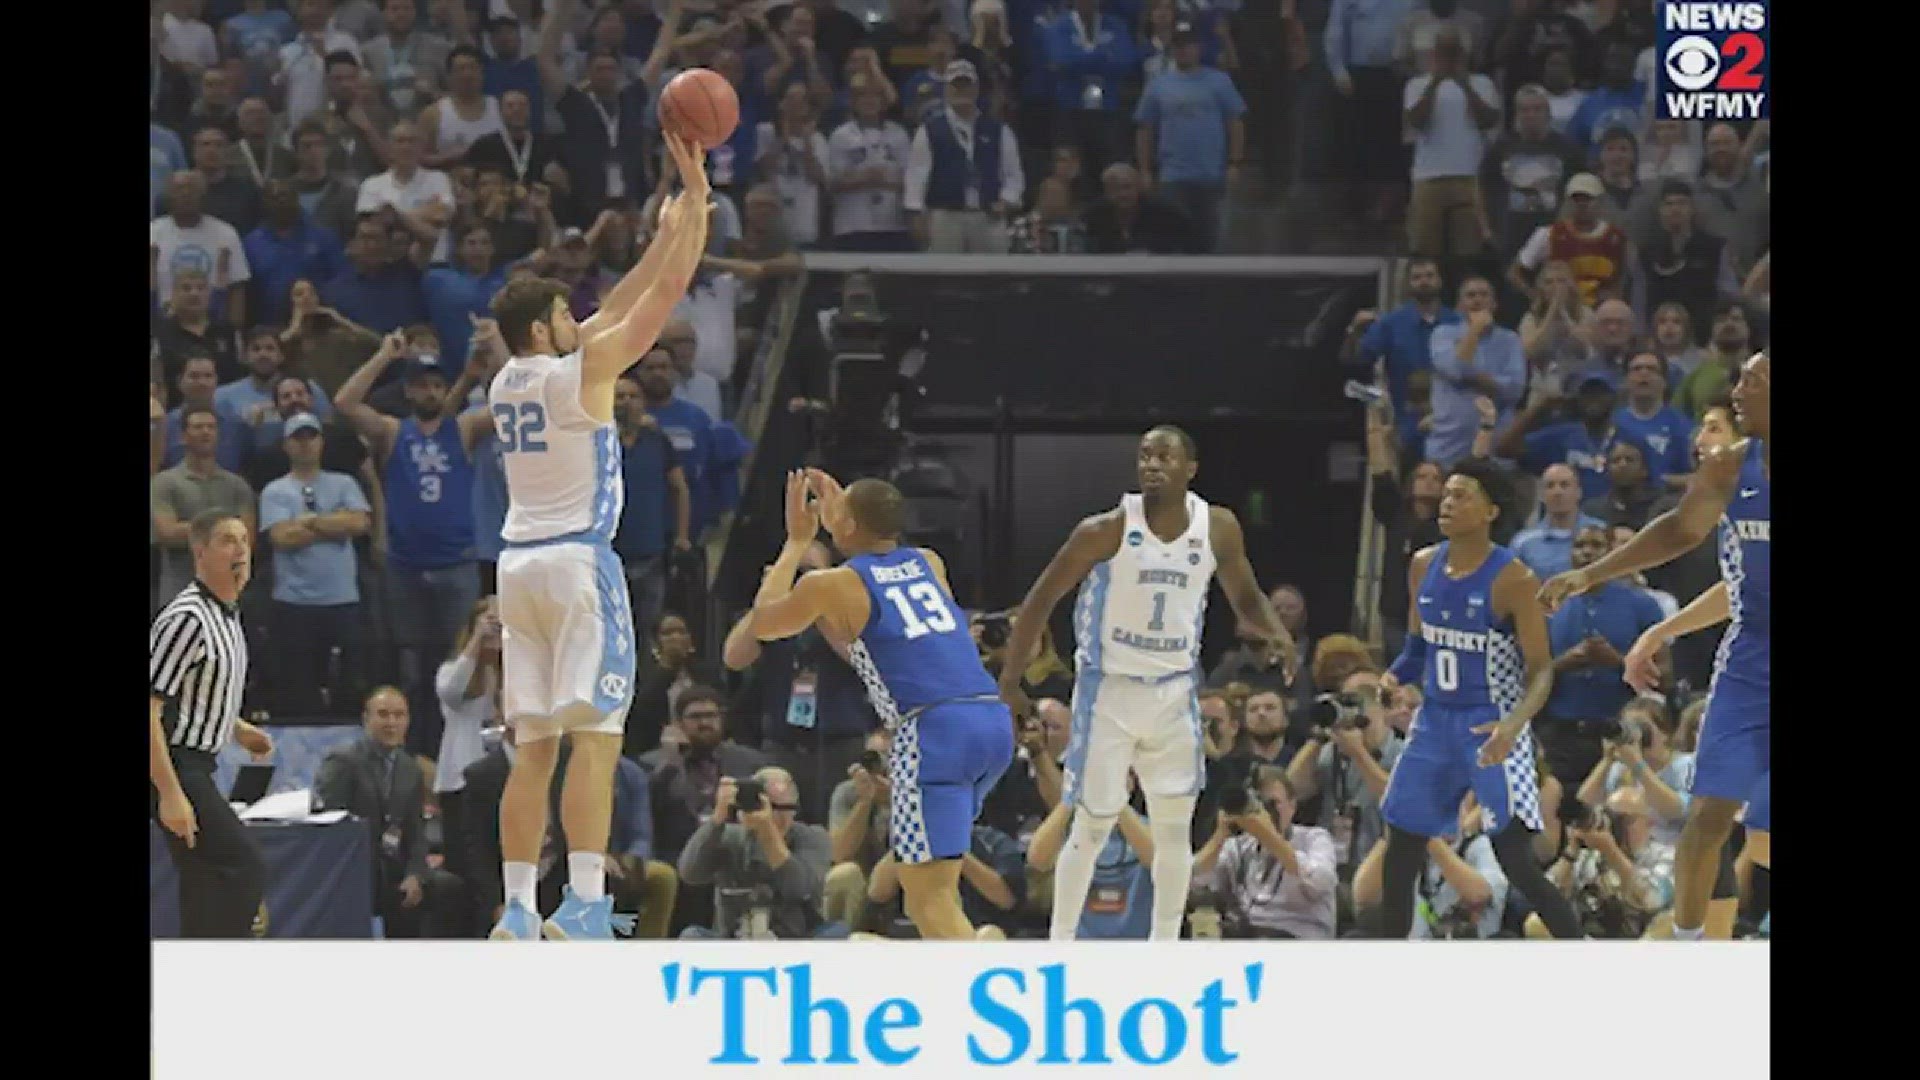 That shot though! After a pass from Theo Pinson, Luke Maye, a sophomore from Huntersville knocked down a basket for the UNC win with his feet on the 3-point line, leaving only .03 seconds left in the game.